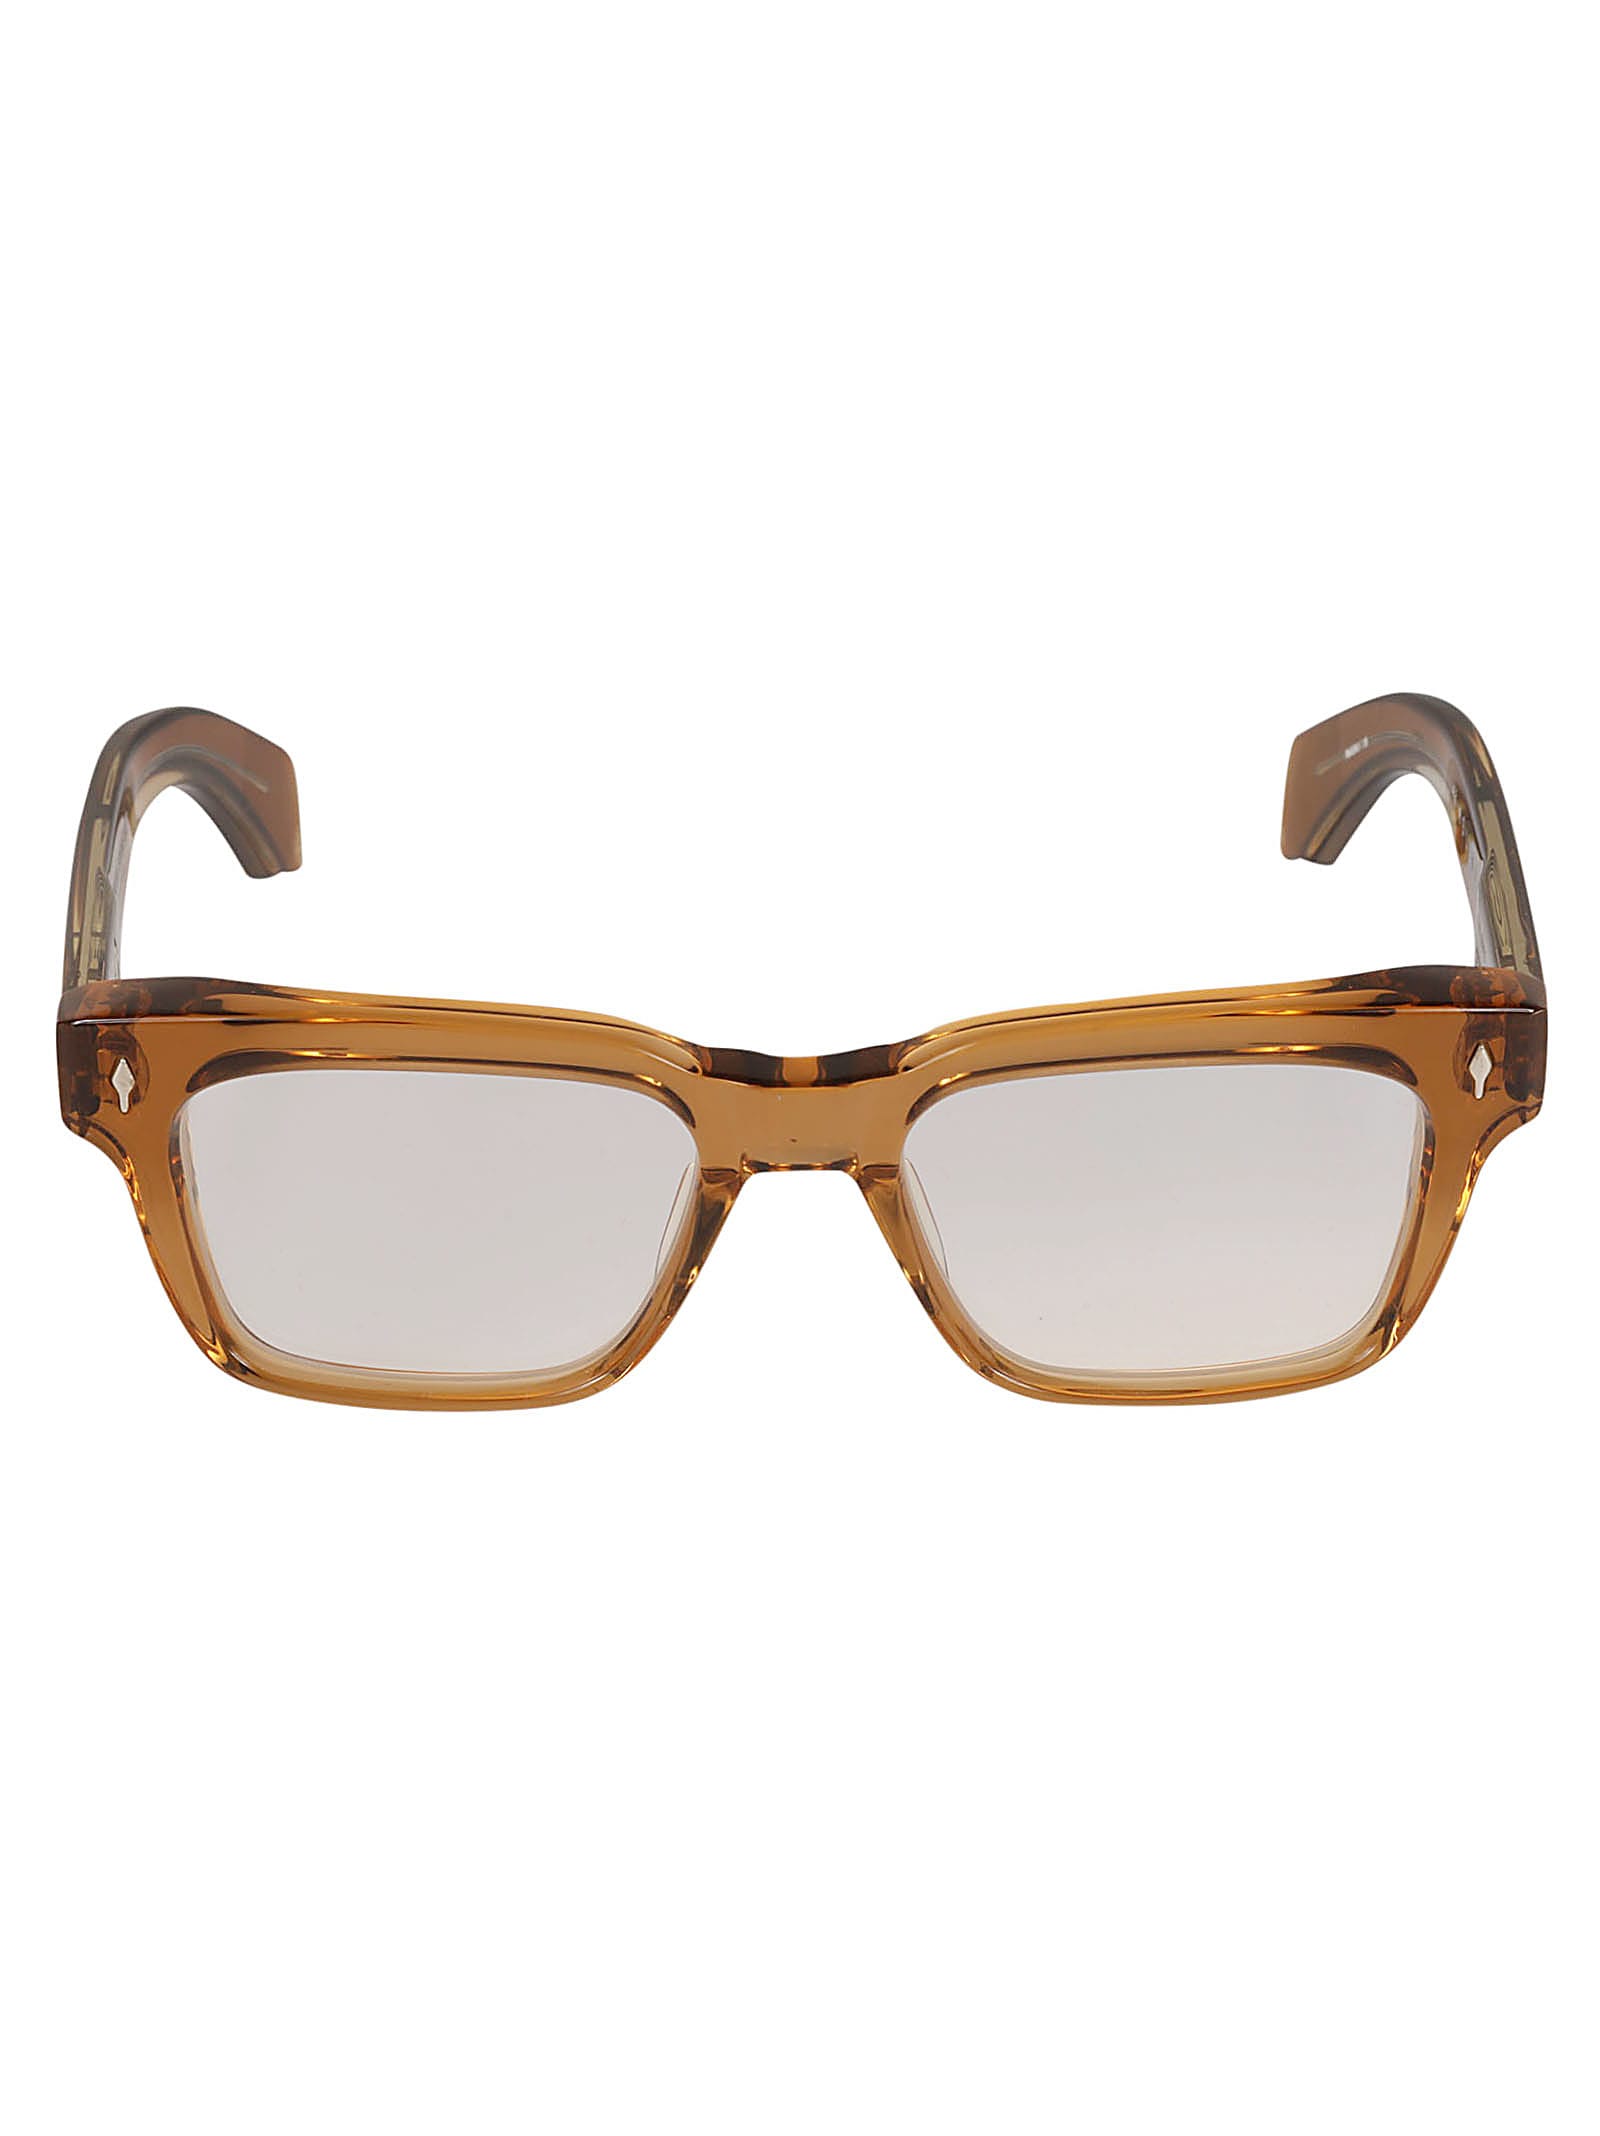 Jacques Marie Mage Square Classic Frame In Wiskey